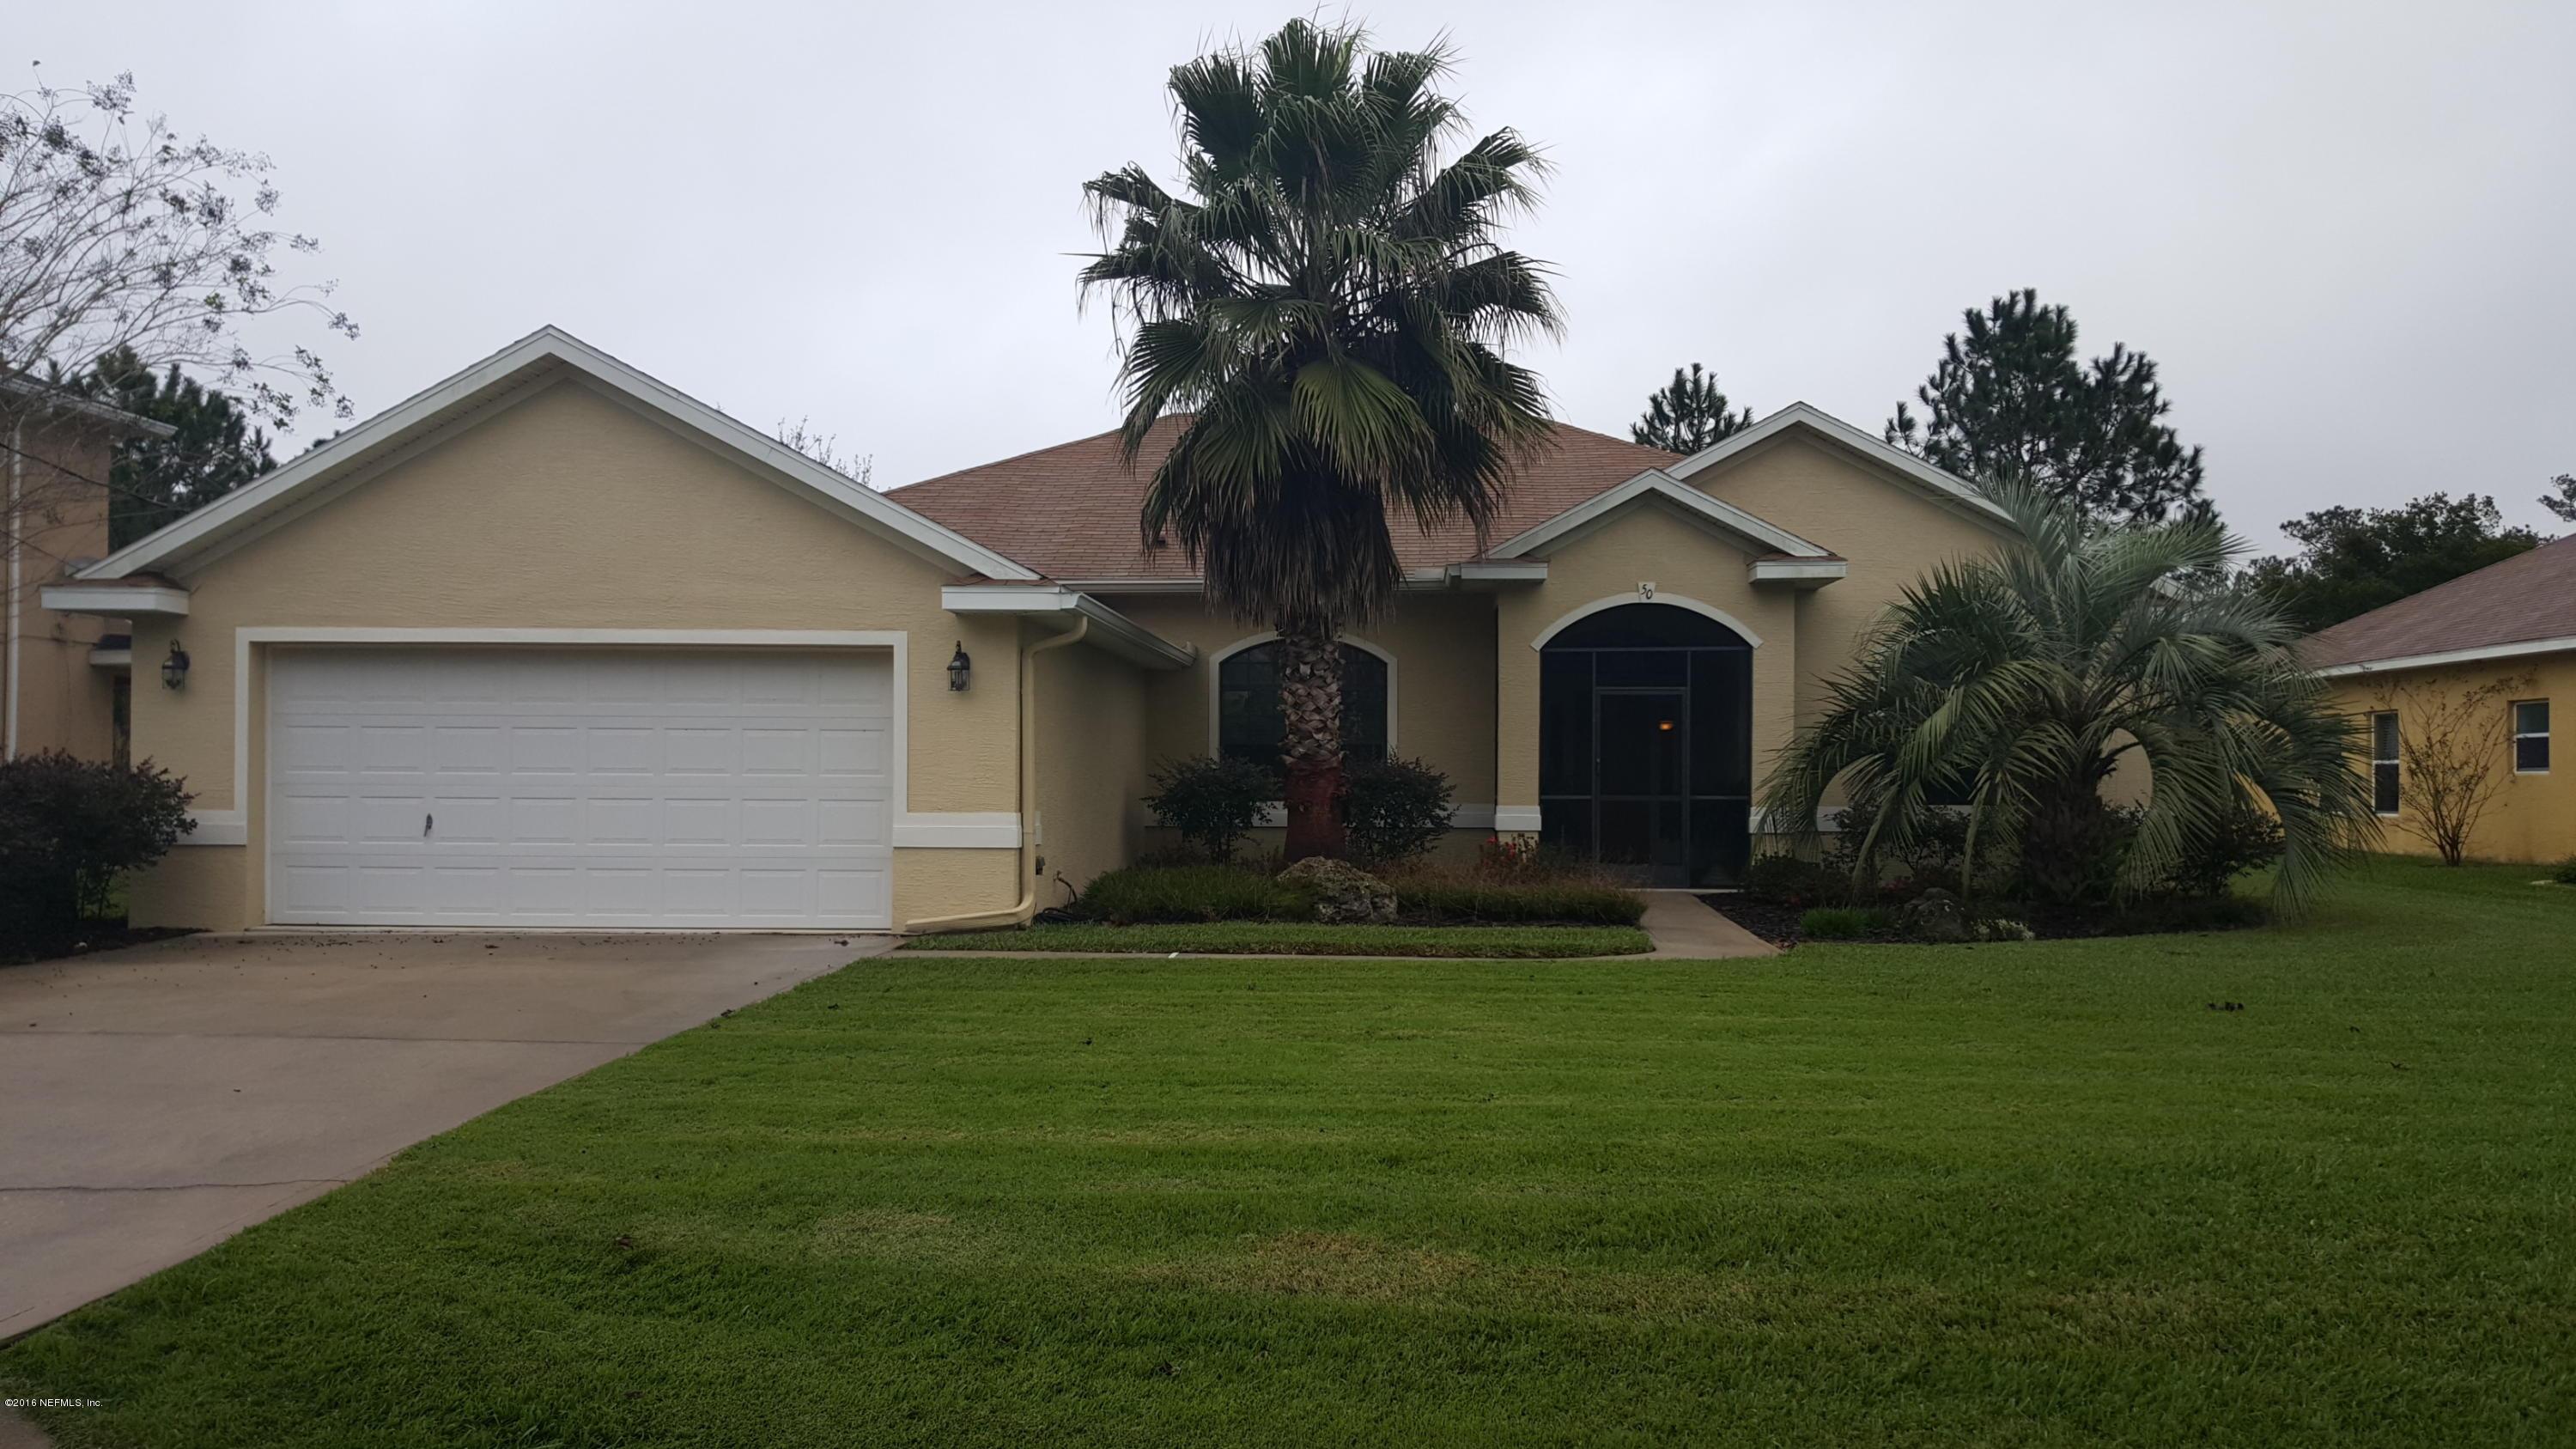 50 LEE, 807614, Palm Coast, Single Family Residence,  sold, PROPERTY EXPERTS 